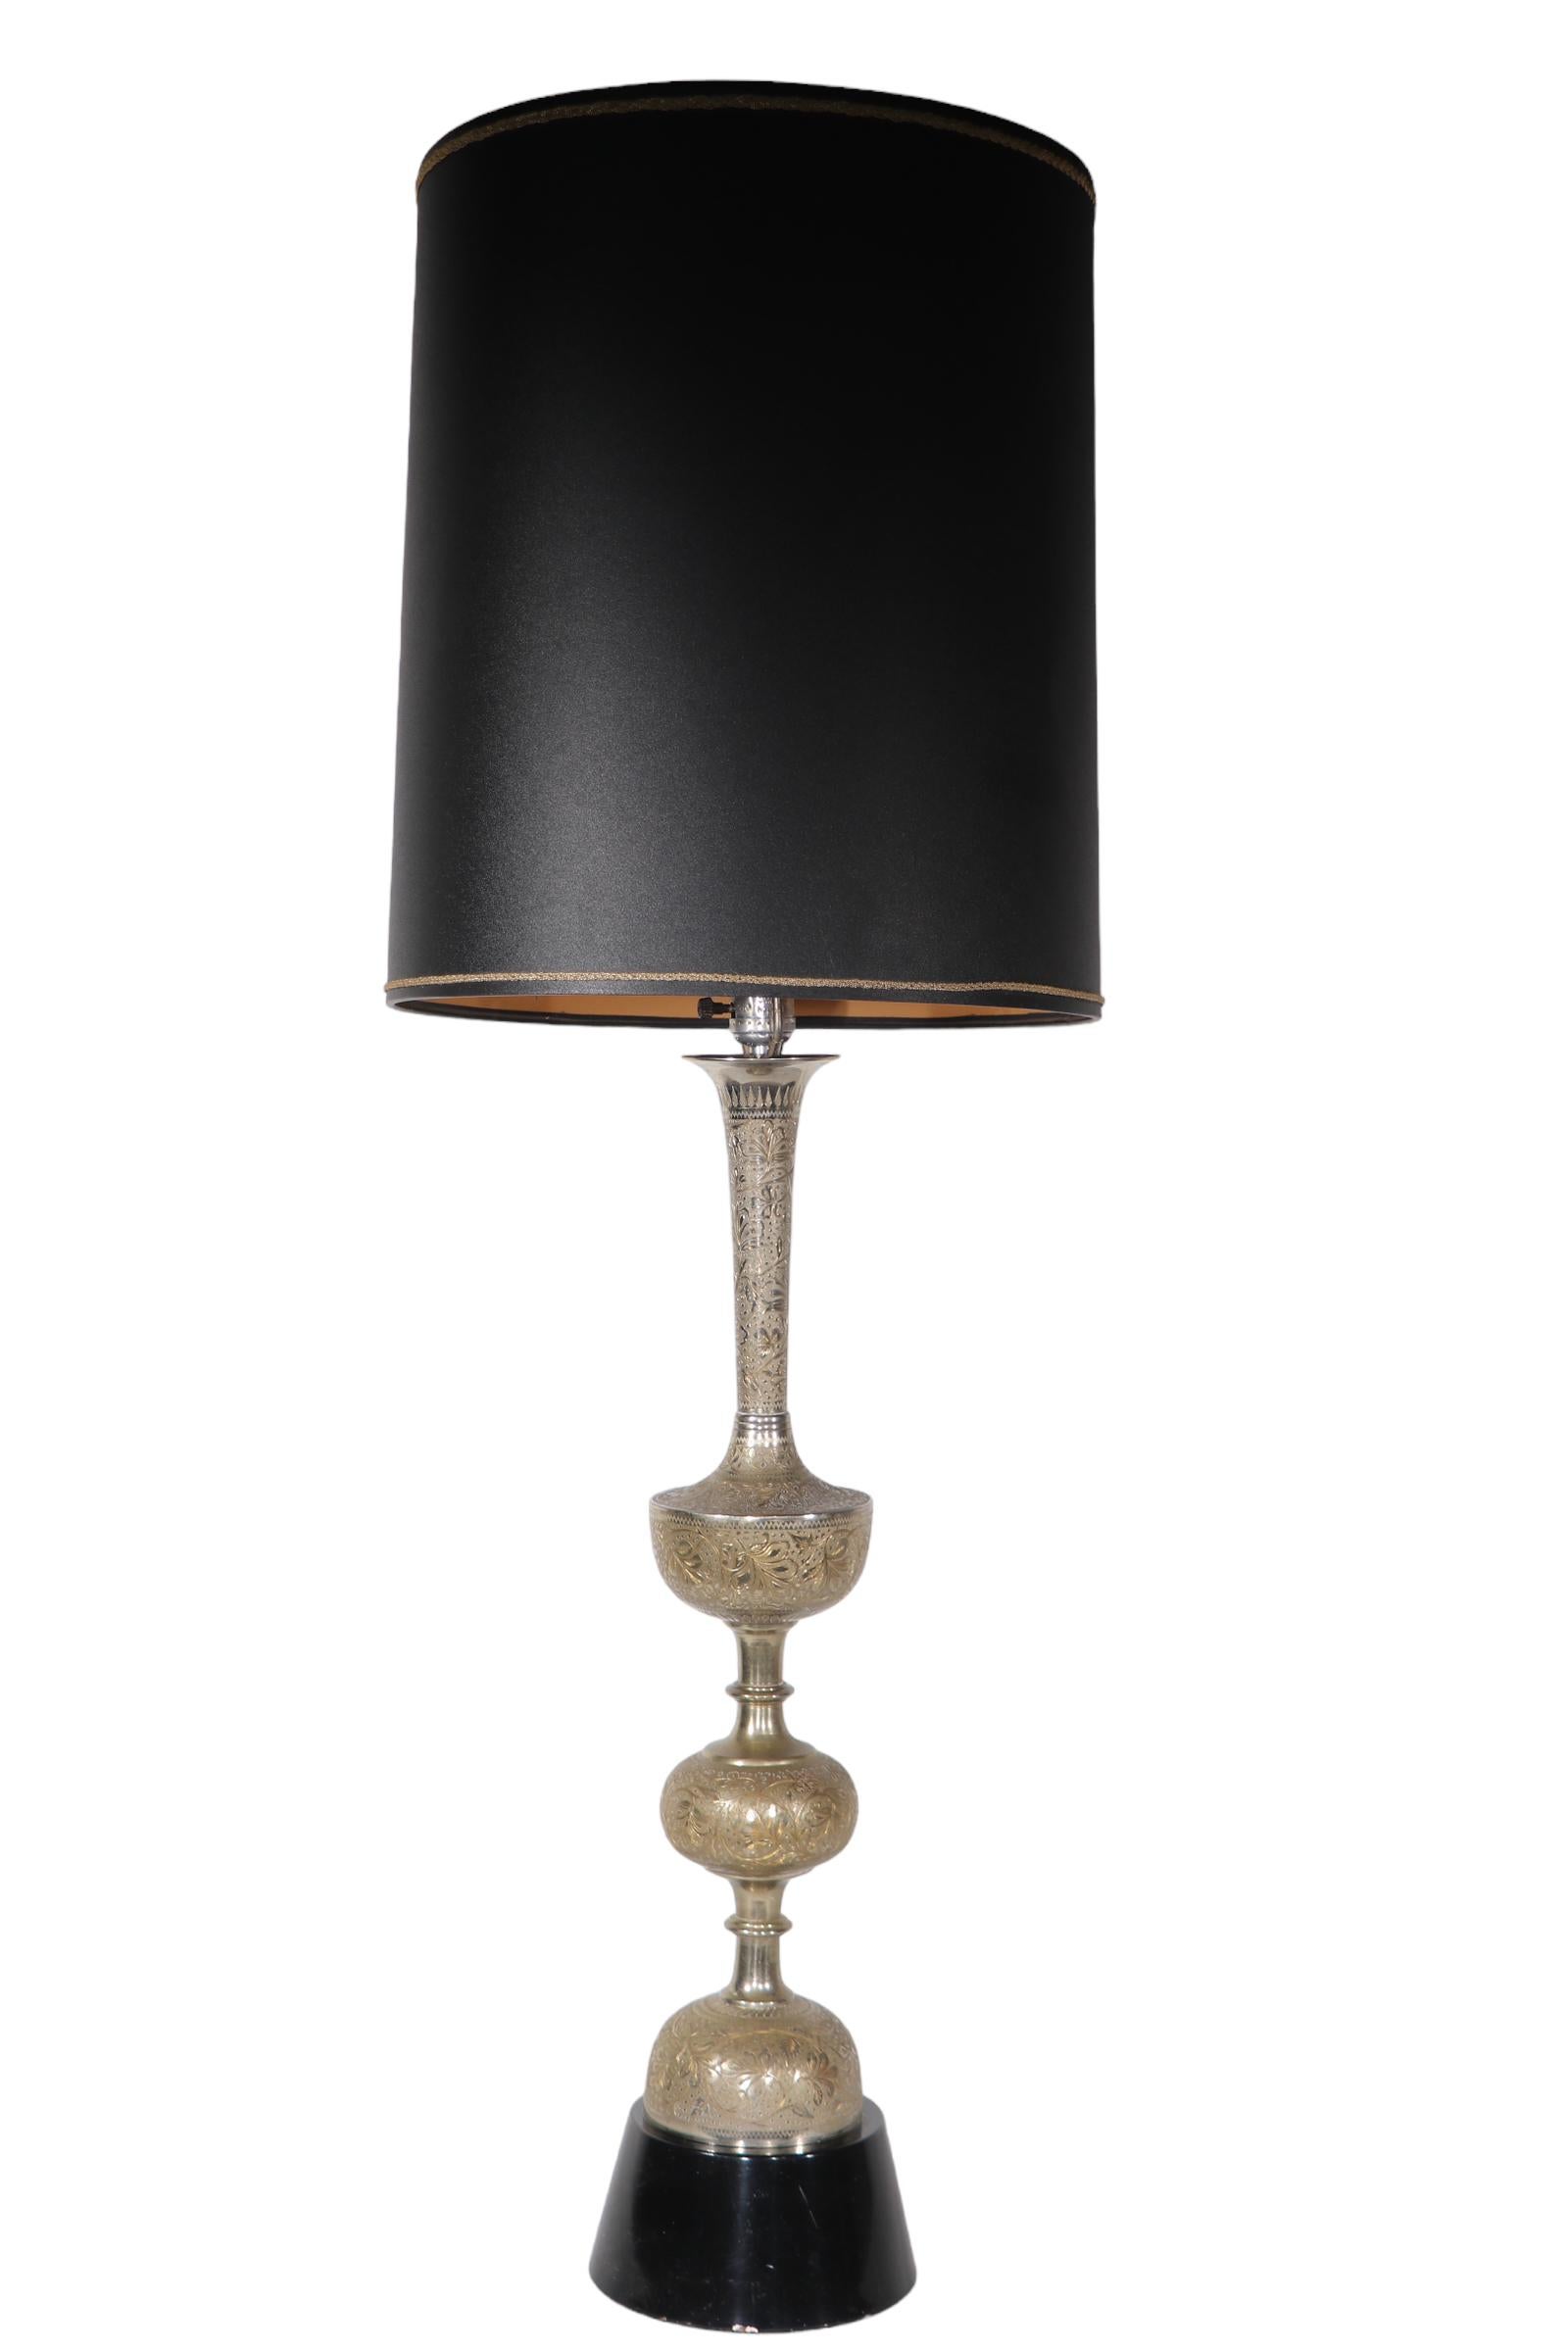  Large Vintage Table Lamp with Chased Silver Finish c. 1970's  For Sale 9